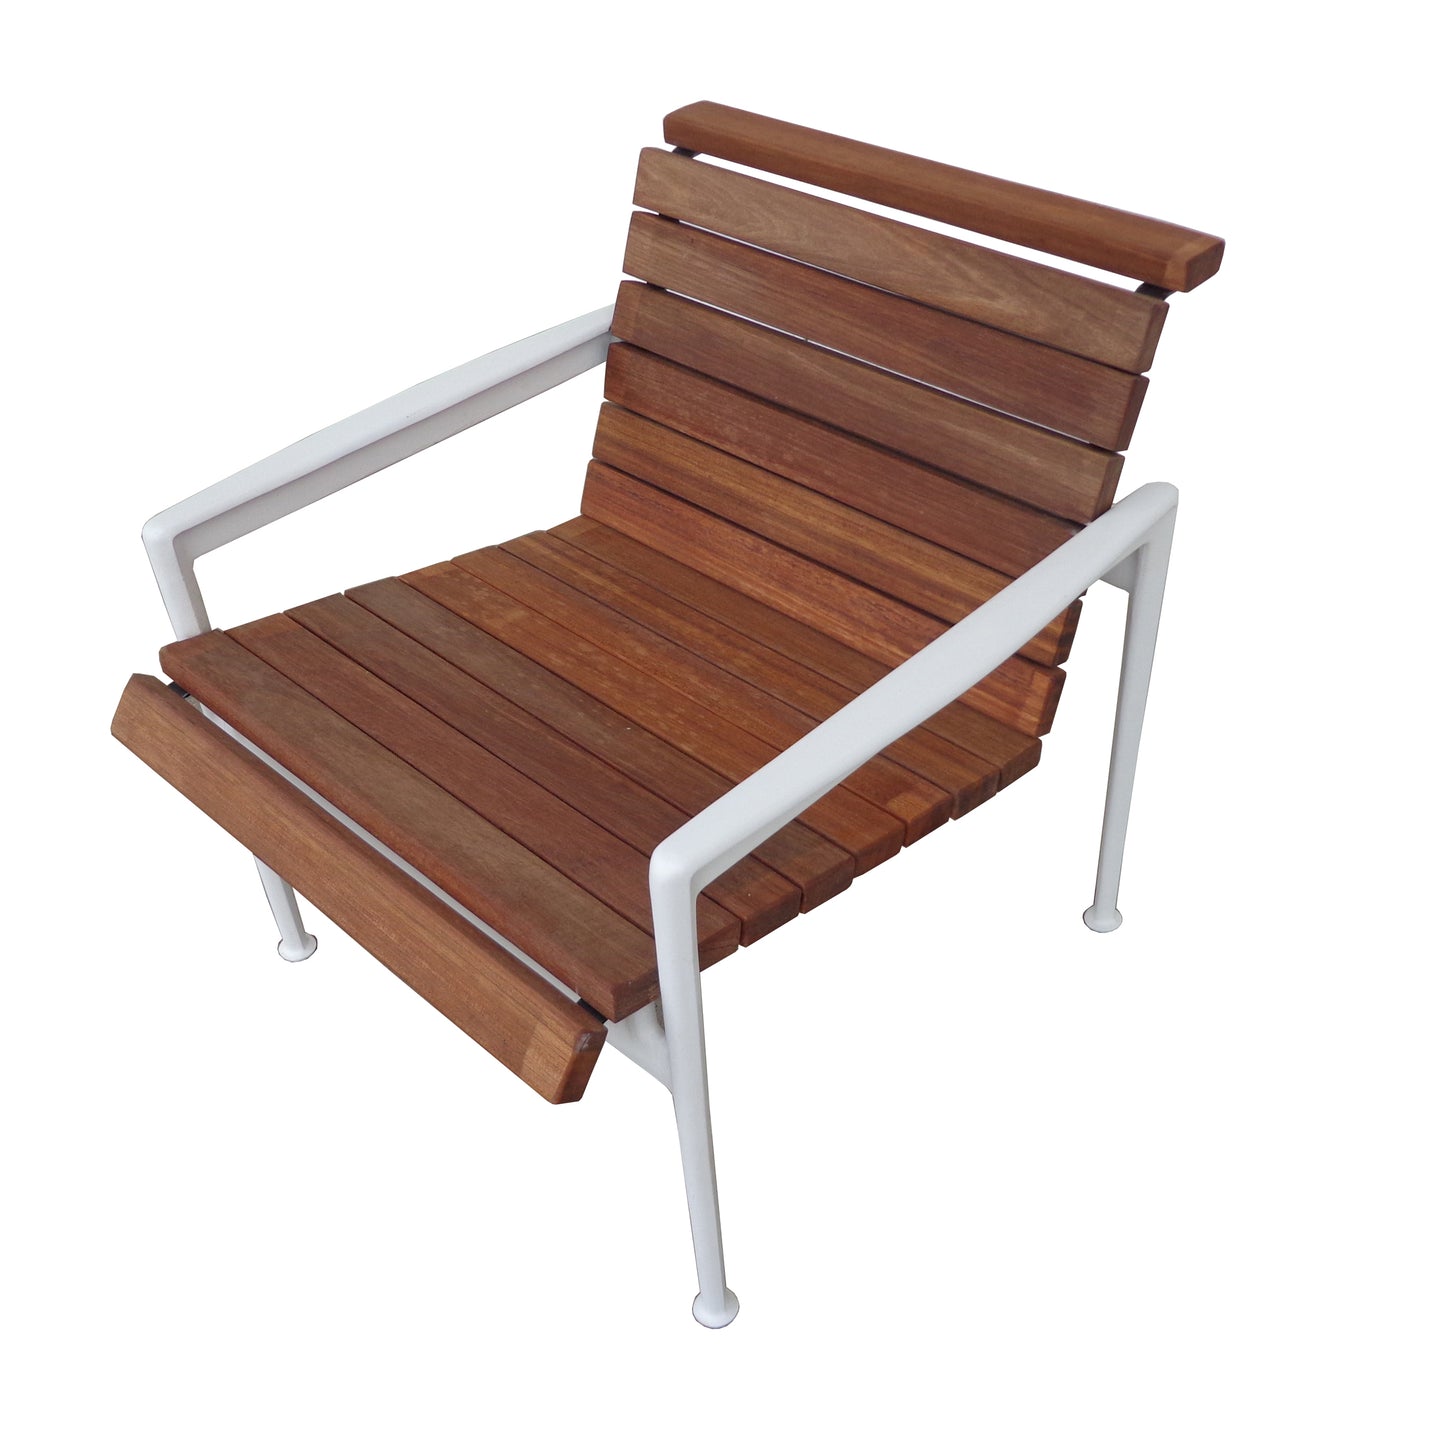 Knoll Richard Schultz Lounge Chair Arms Patio Restored with Solid Teak